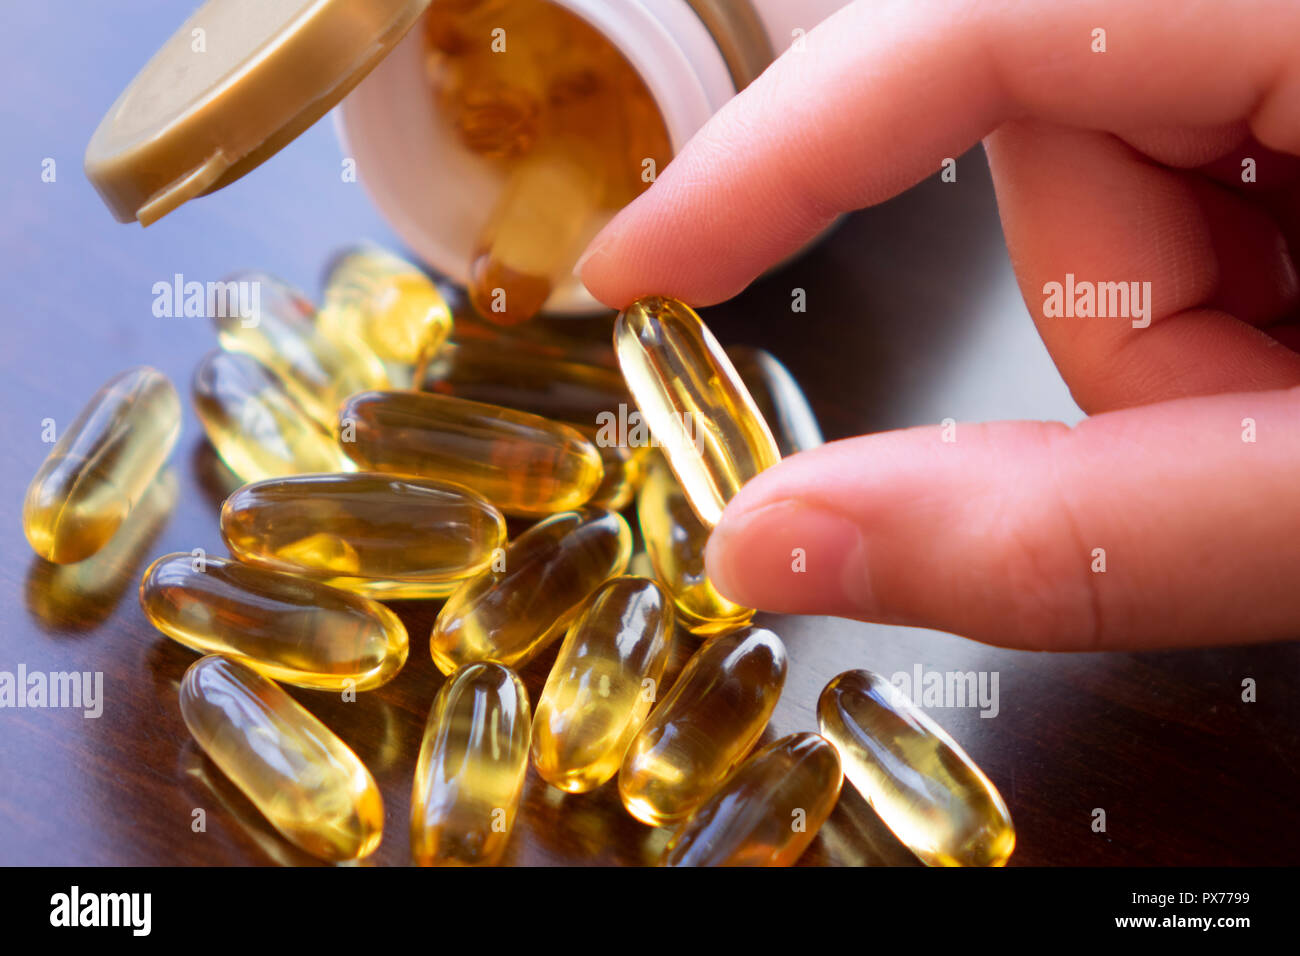 Healthy Diet Nutrition. Woman Holding Fish Oil Pill In Hand. Omega-3. Vitamin And Dietary Supplements. High Resolution Stock Photo